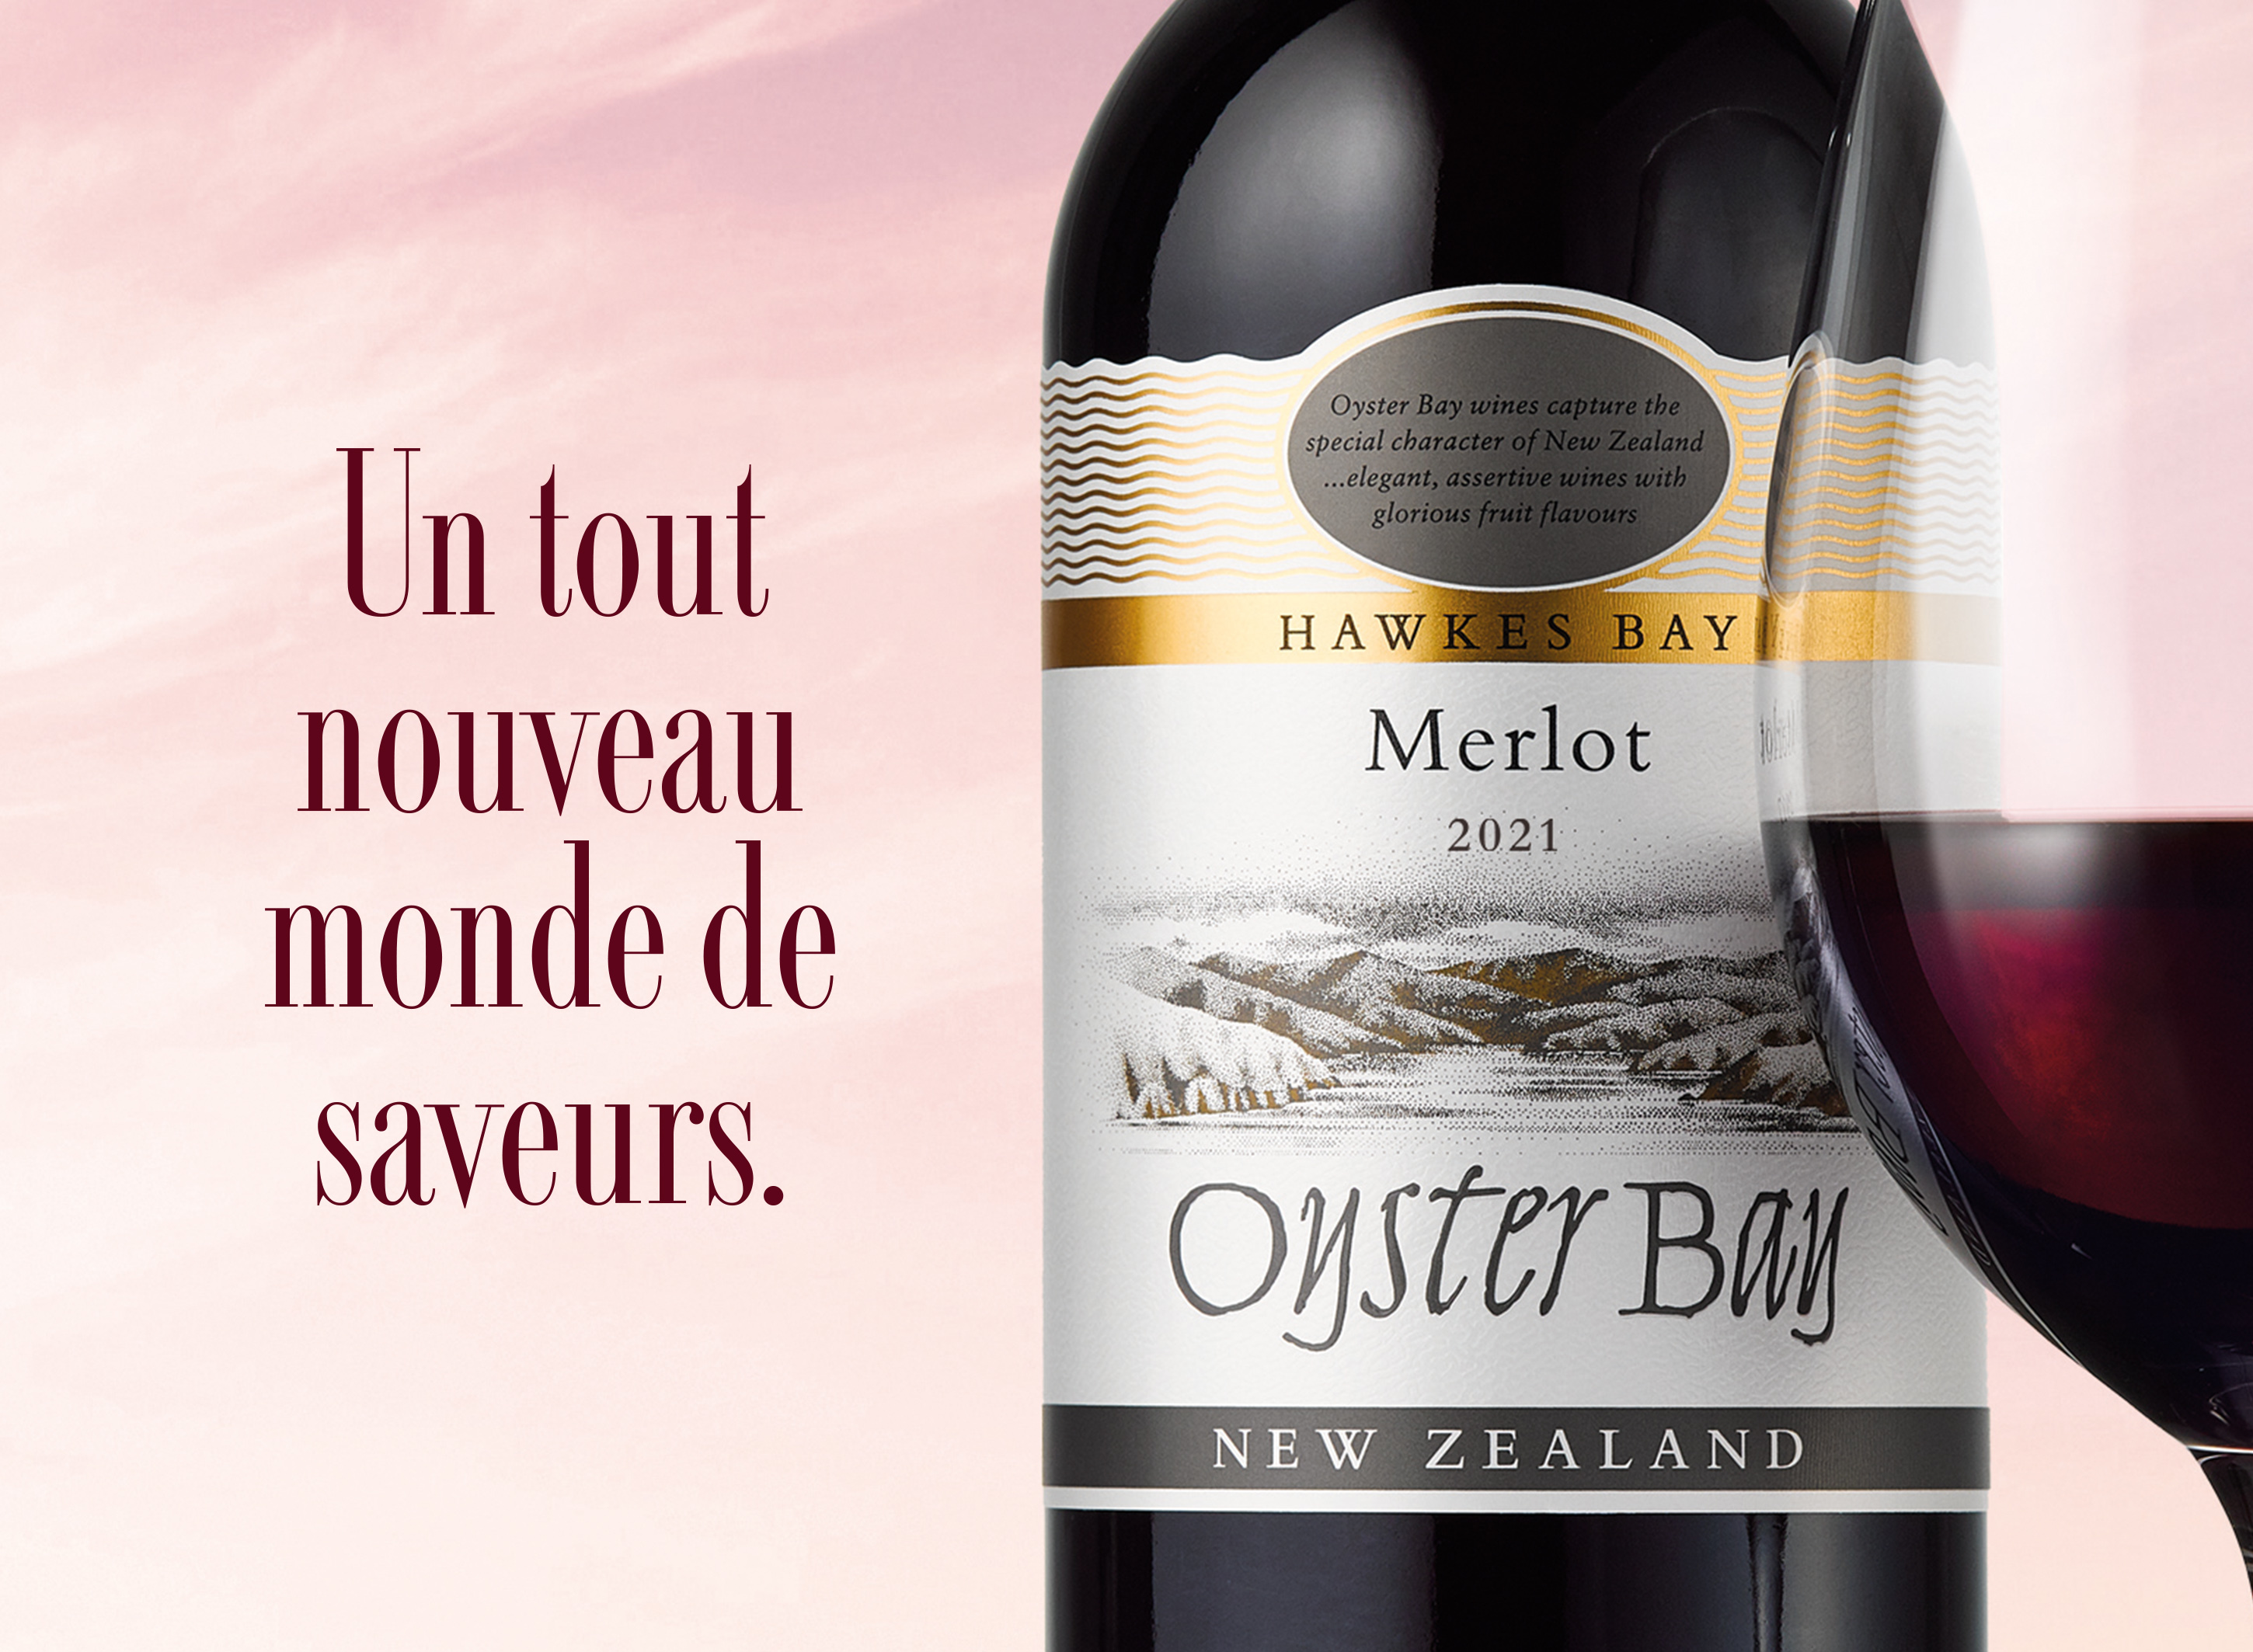 Oyster Bay Hawkes Bay New Zealand Merlot Wine bottle and glass French